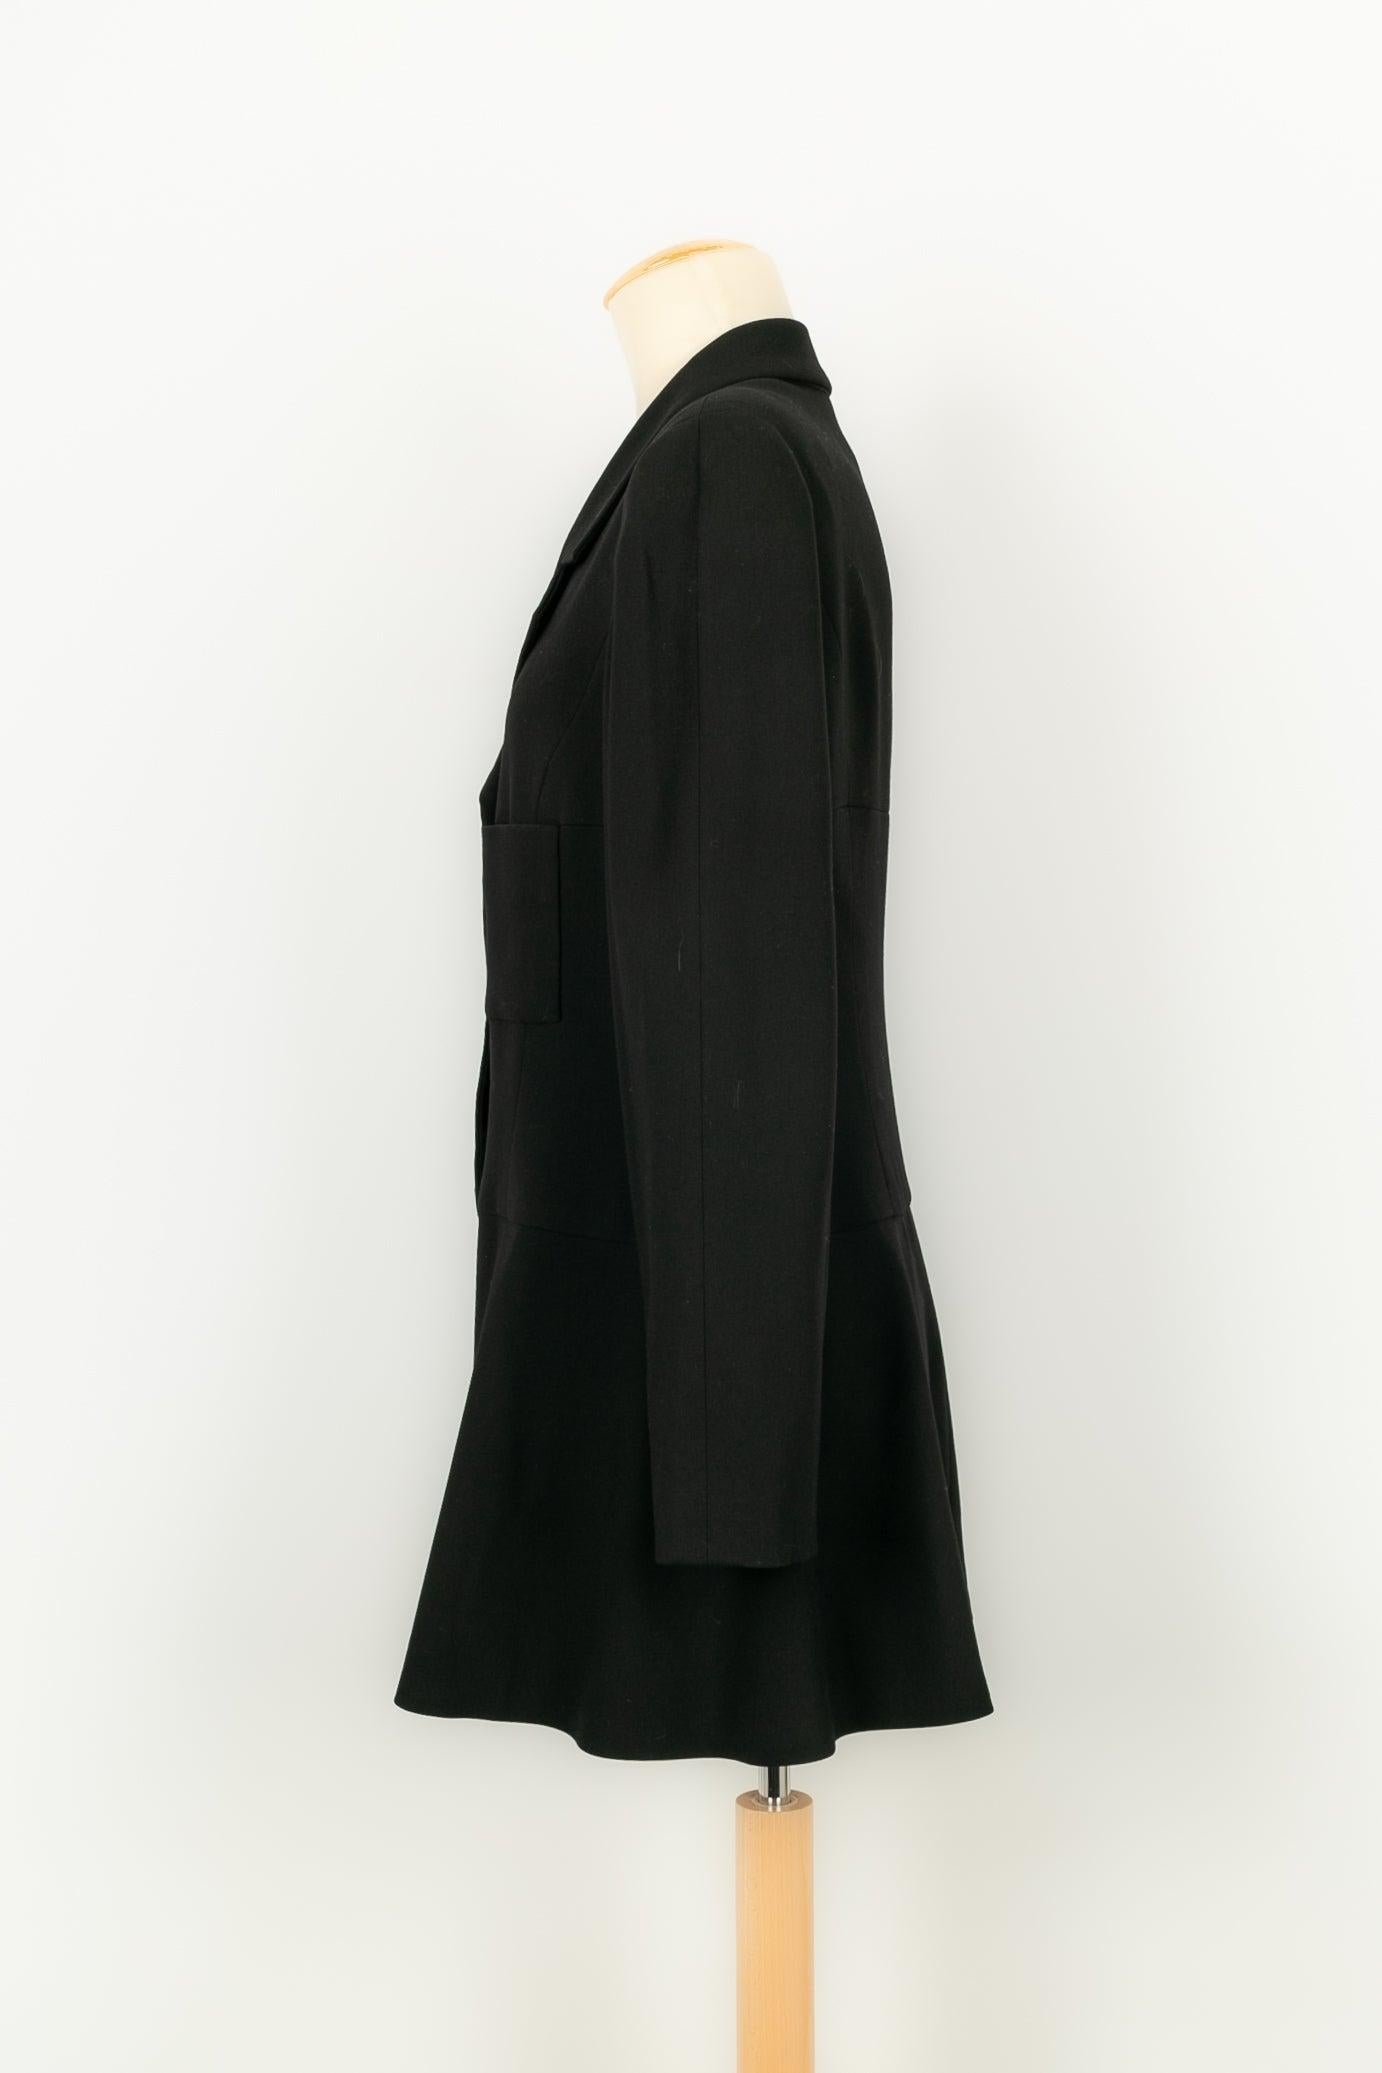 Women's Chanel Suit Set of Jacket and Pants in Black Wool, 1997 For Sale